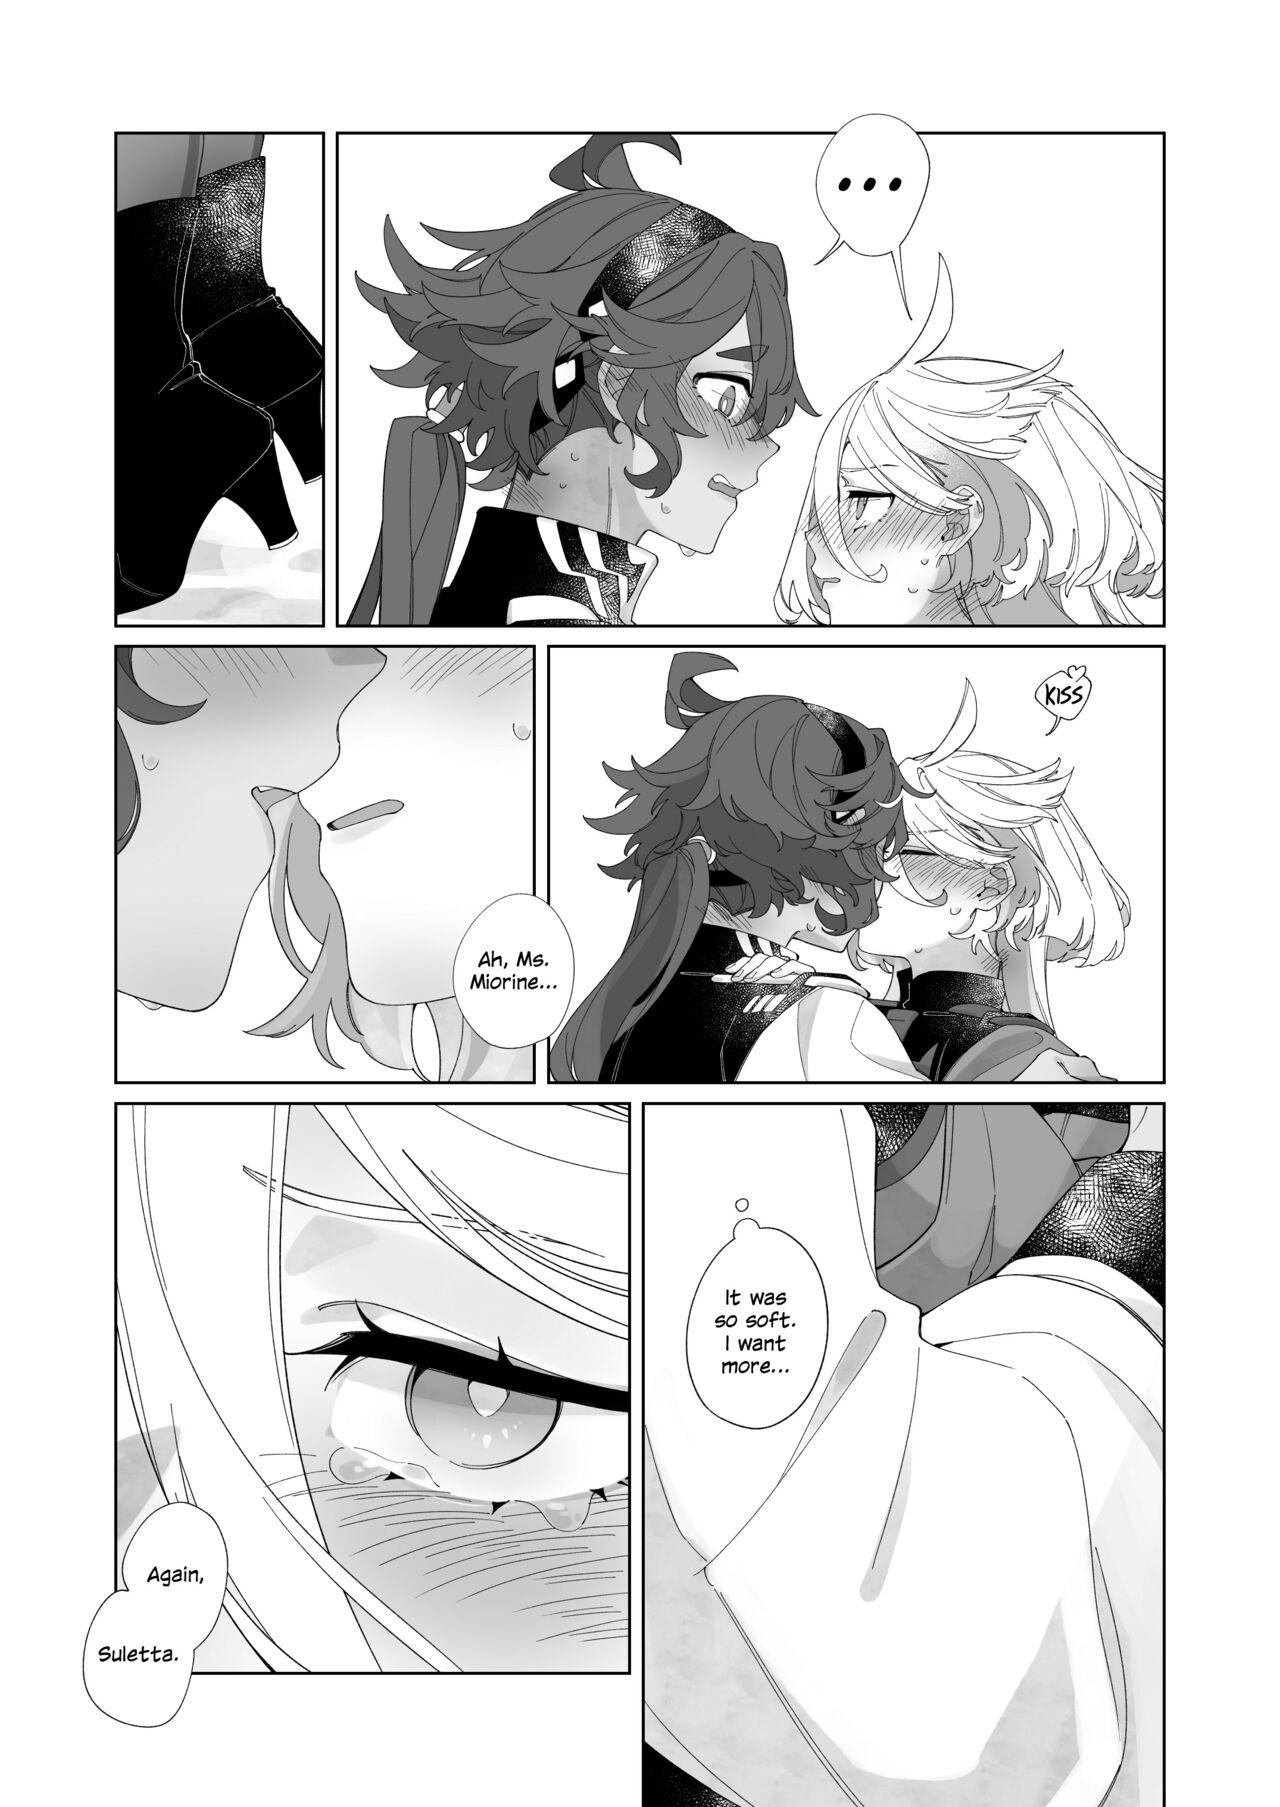 Super Kiss no Ato Nani ga Shitai? | After Kissing, What Else Do You Want to Do? - Mobile suit gundam the witch from mercury Phat - Page 6